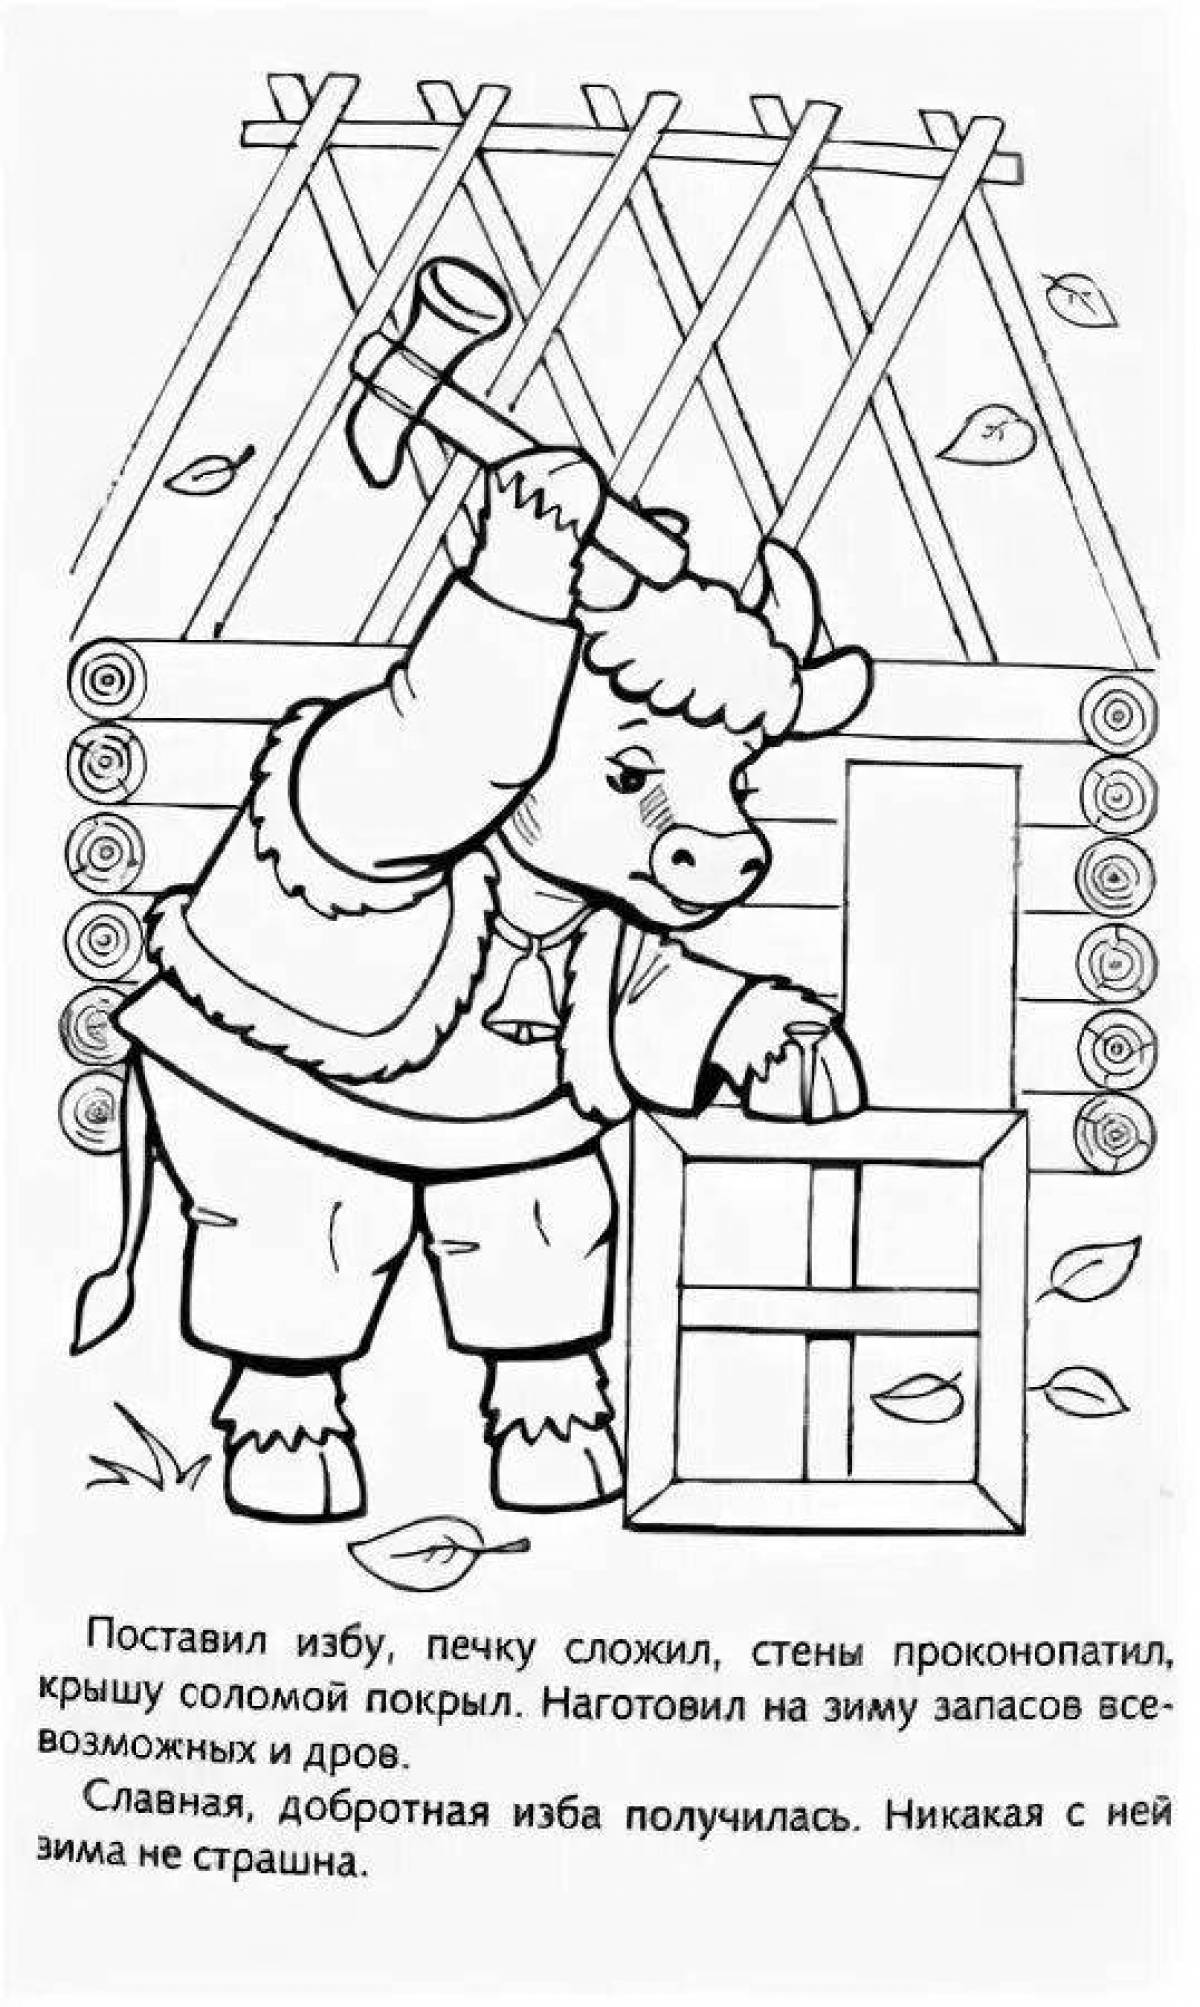 Colorful winter animal hut coloring book